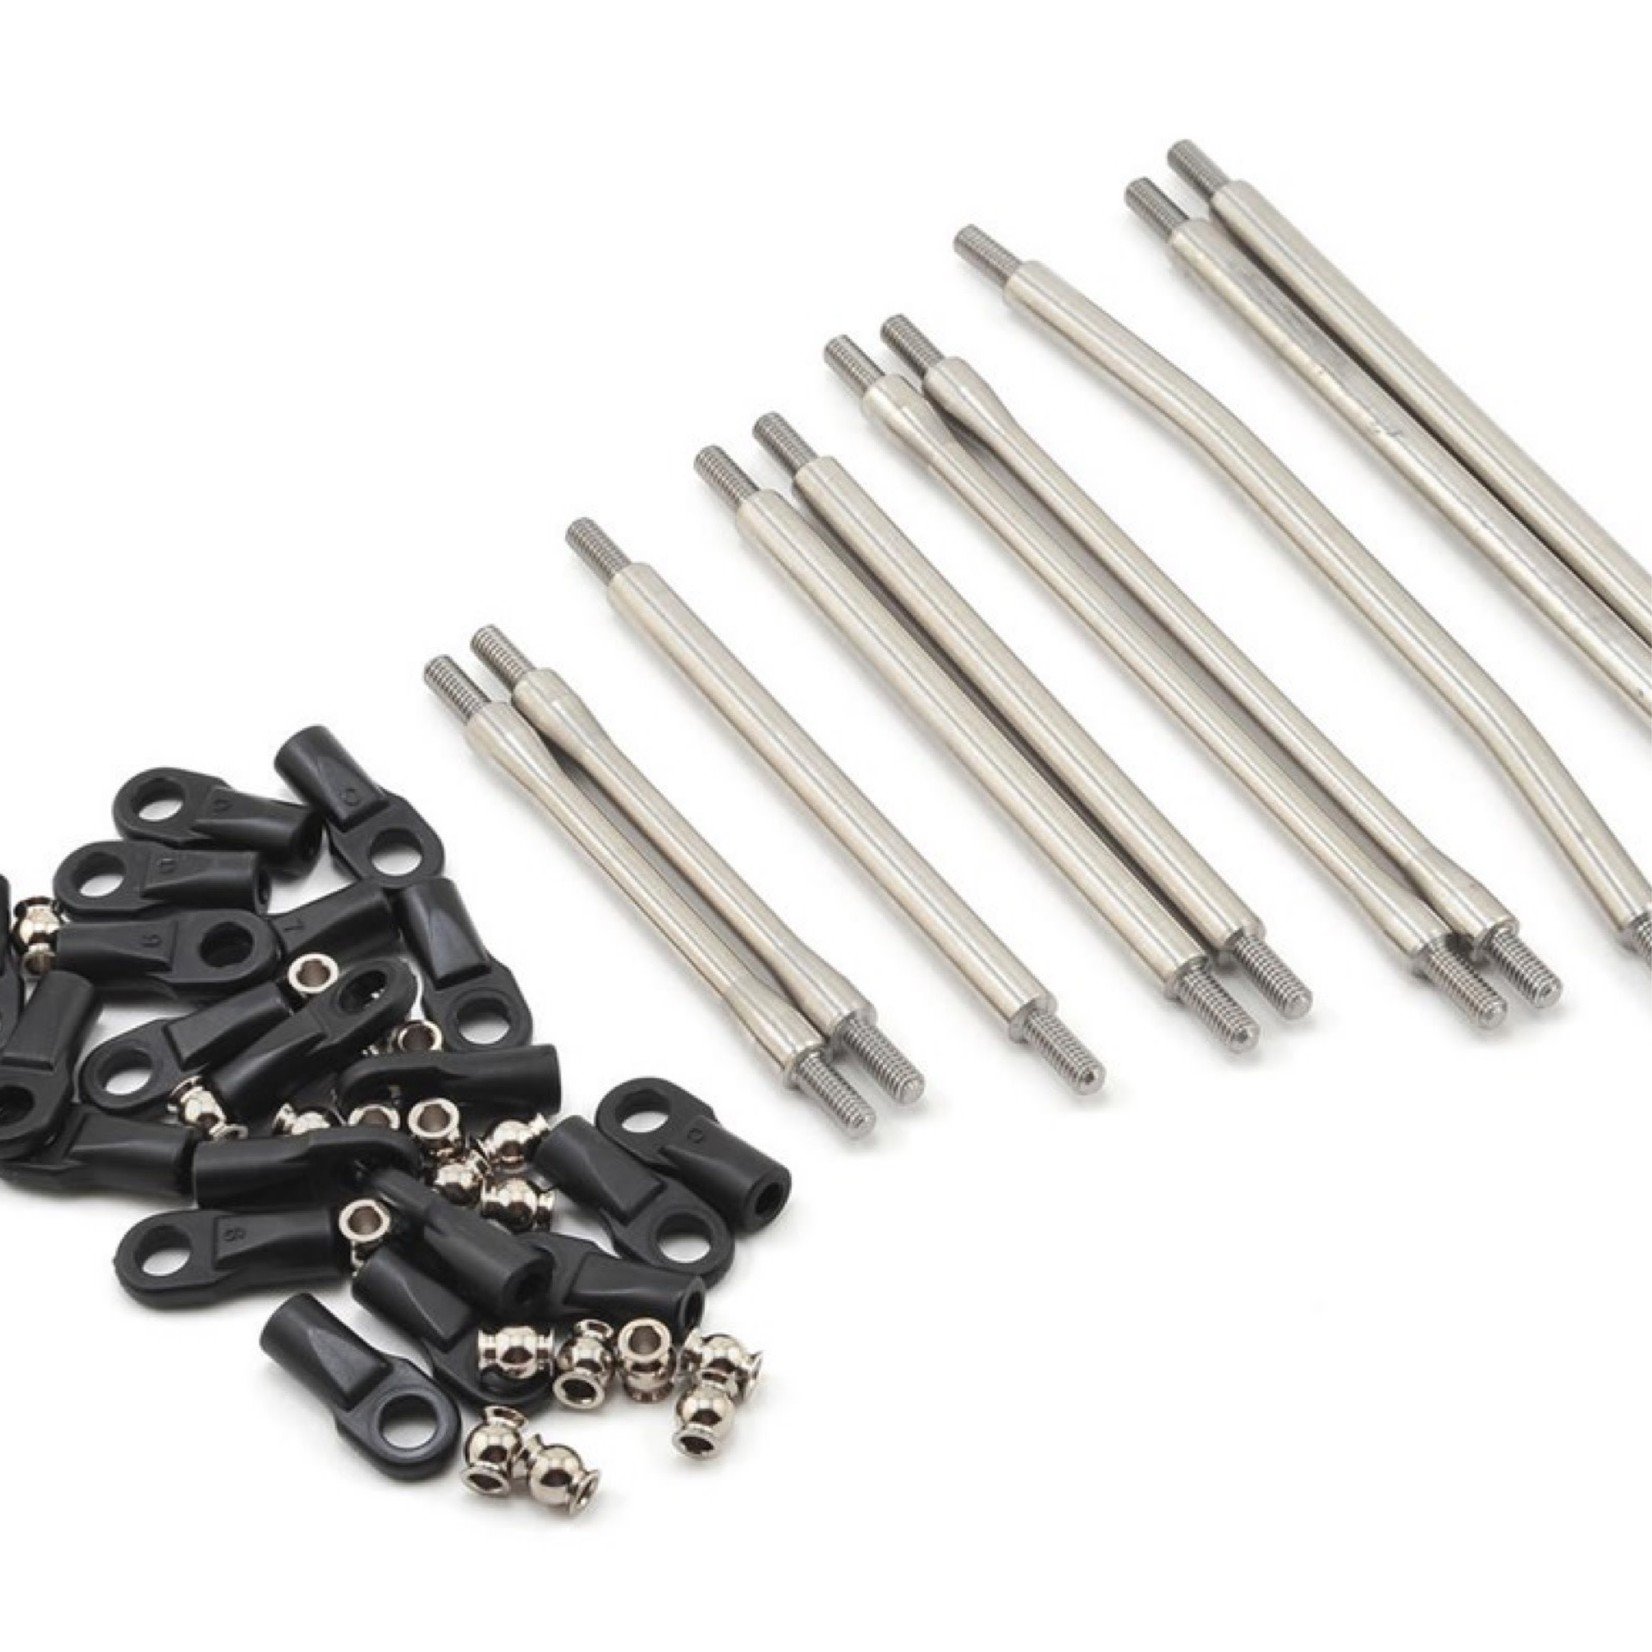 Incision Incision SCX10 II 1/4" Stainless Steel Link Kit (10) #IRC00070